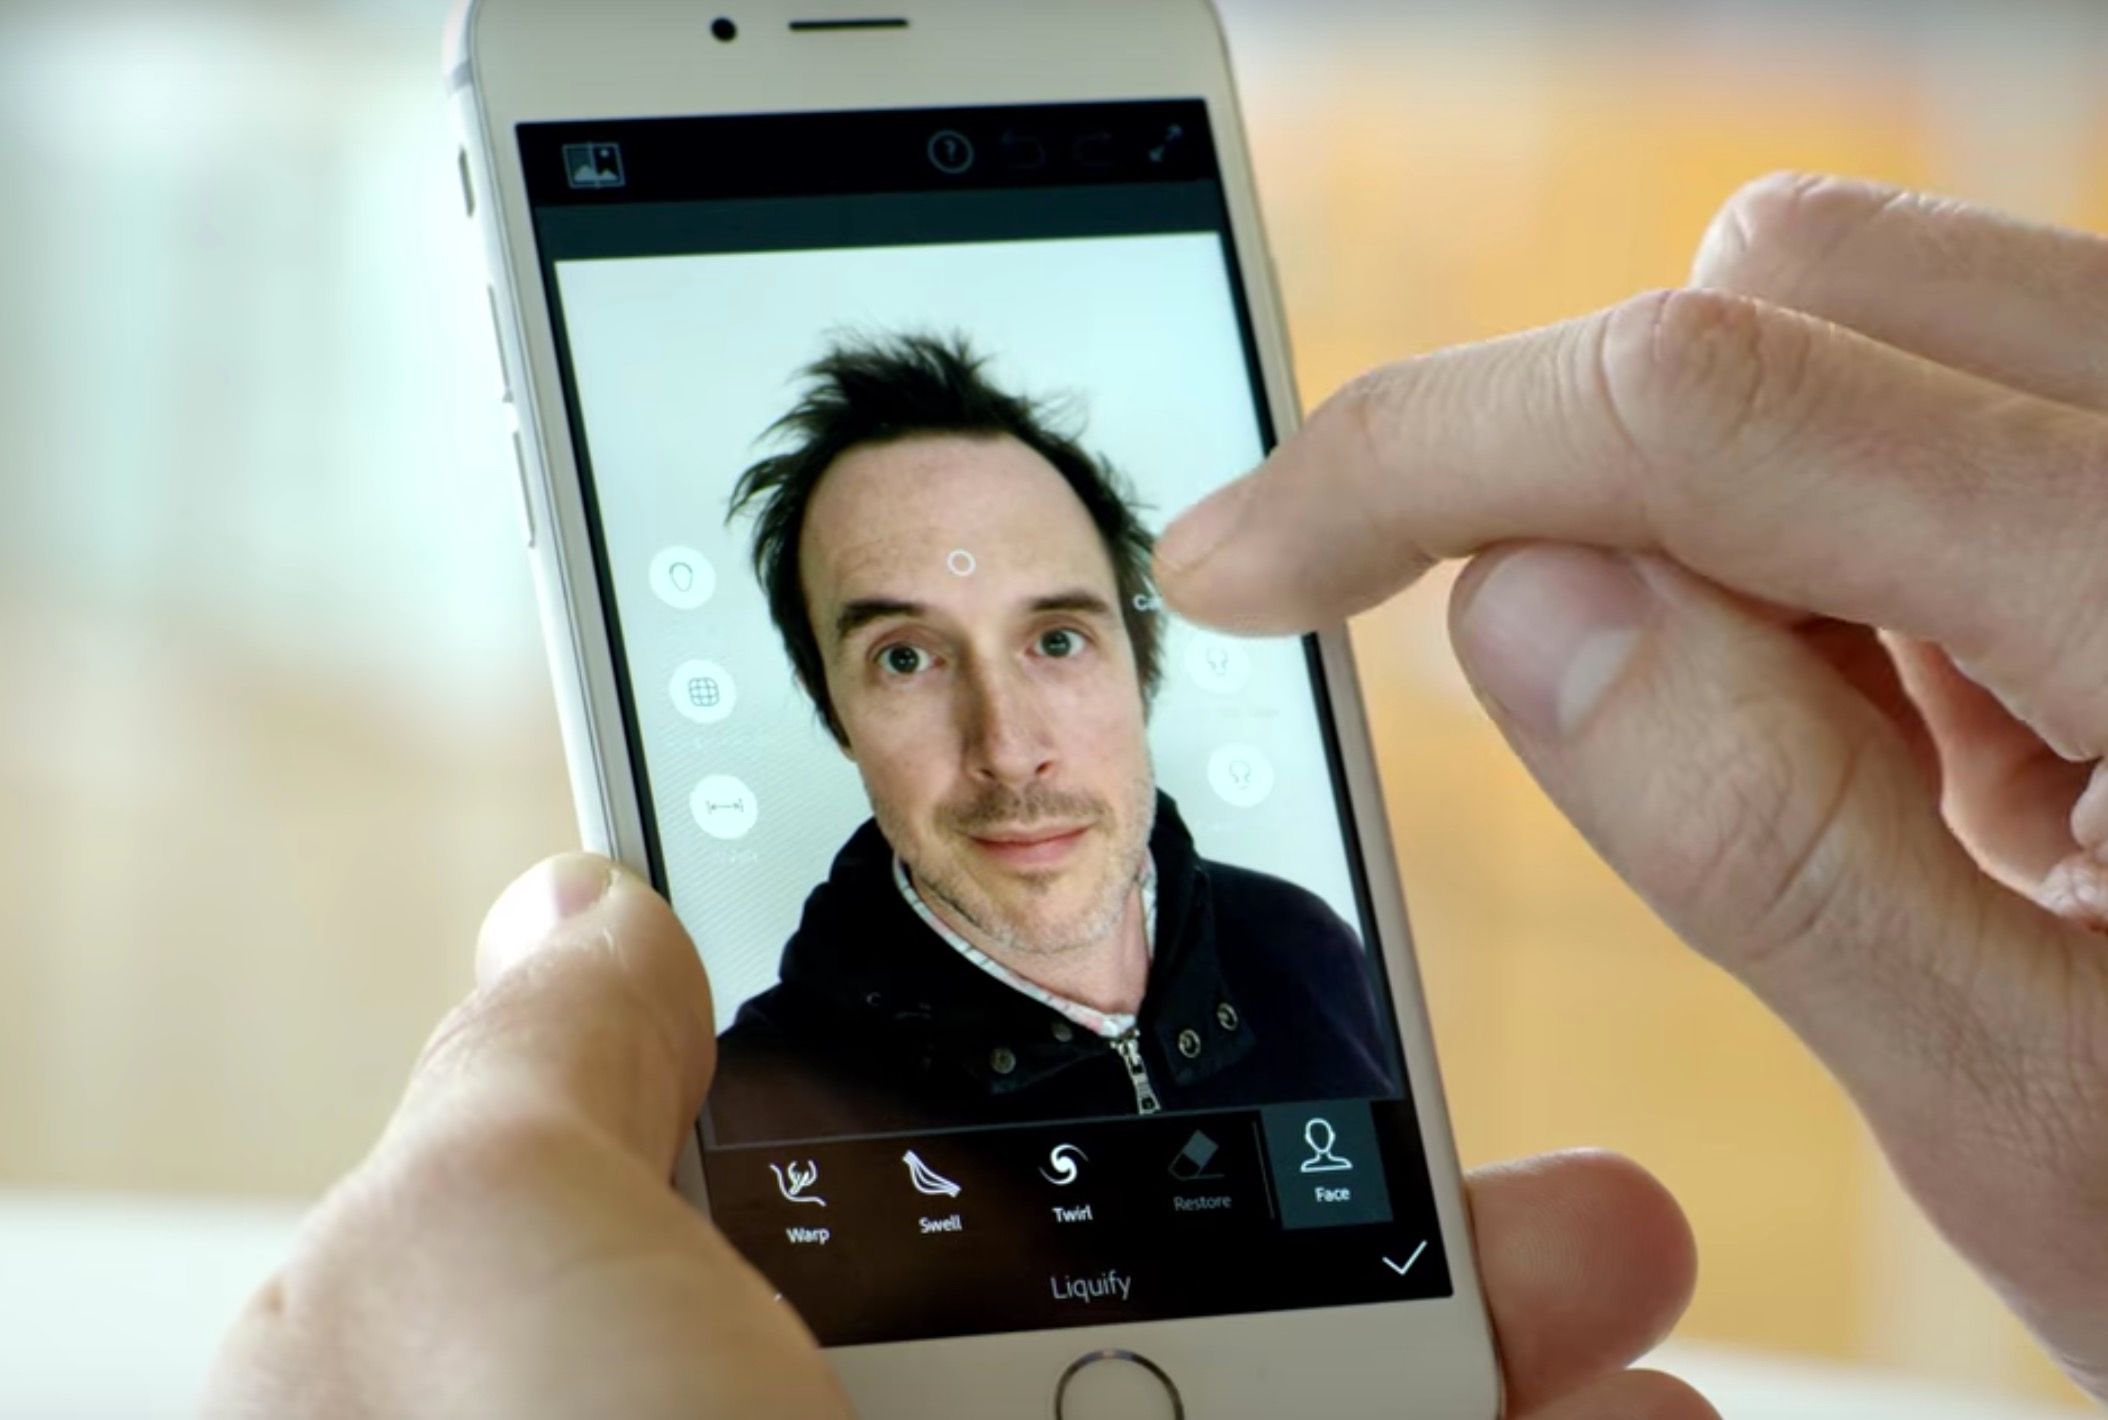 adobe wants to use ai and machine learning to beautify your selfies image 1